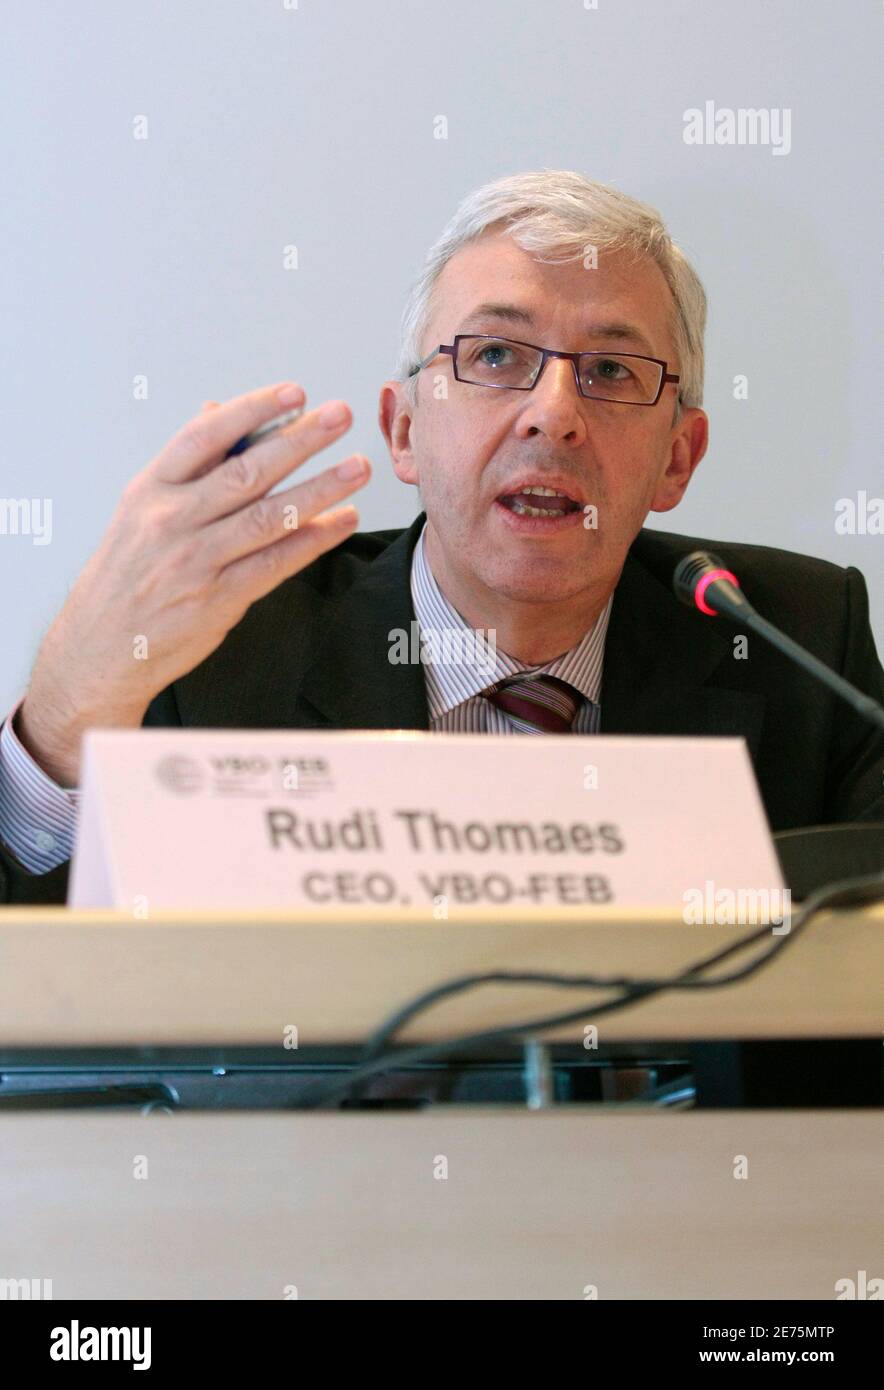 Belgian Enterprises Federation (FEB/VBO) CEO Rudi Thomaes speaks during a news conference to present expectations ahead of the 2009 European Business Summit in Brussels March 2, 2009.   REUTERS/Sebastien Pirlet    (BELGIUM) Stock Photo